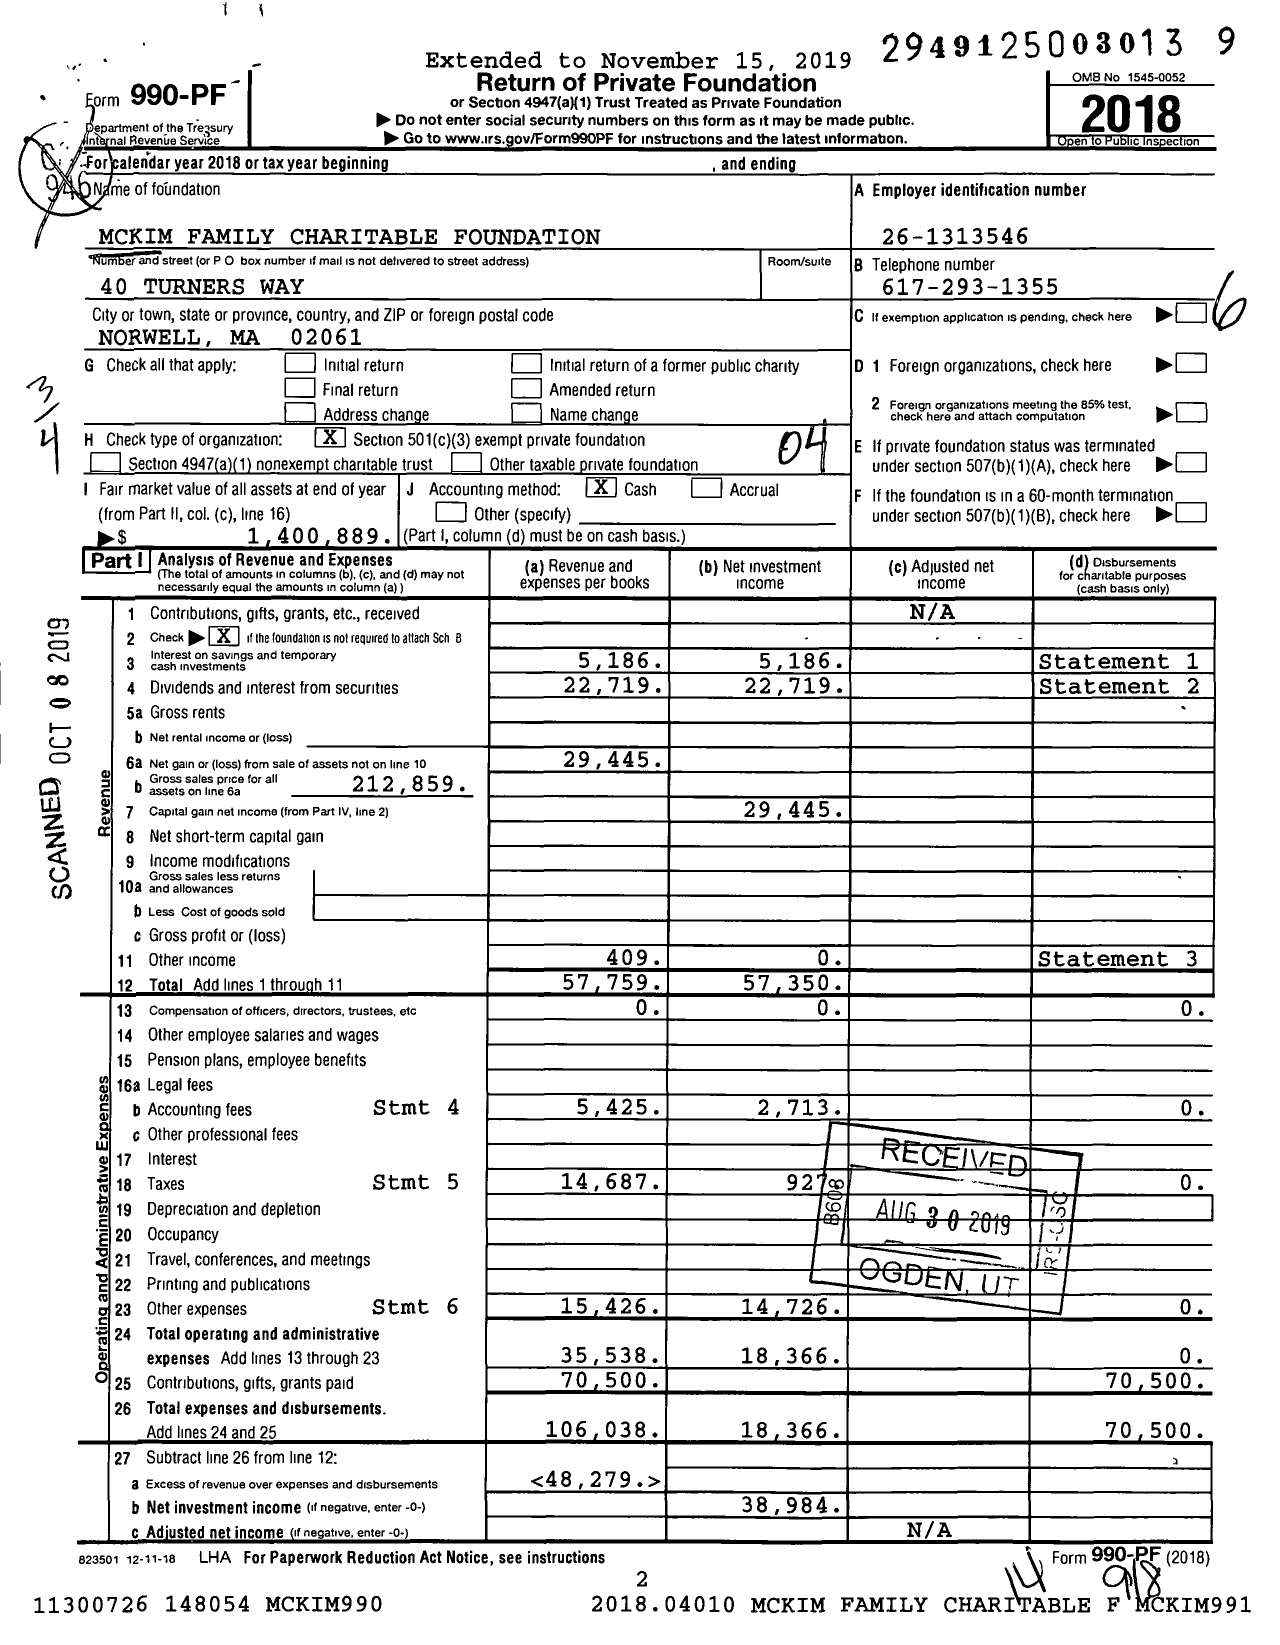 Image of first page of 2018 Form 990PF for Mckim Family Charitable Foundation